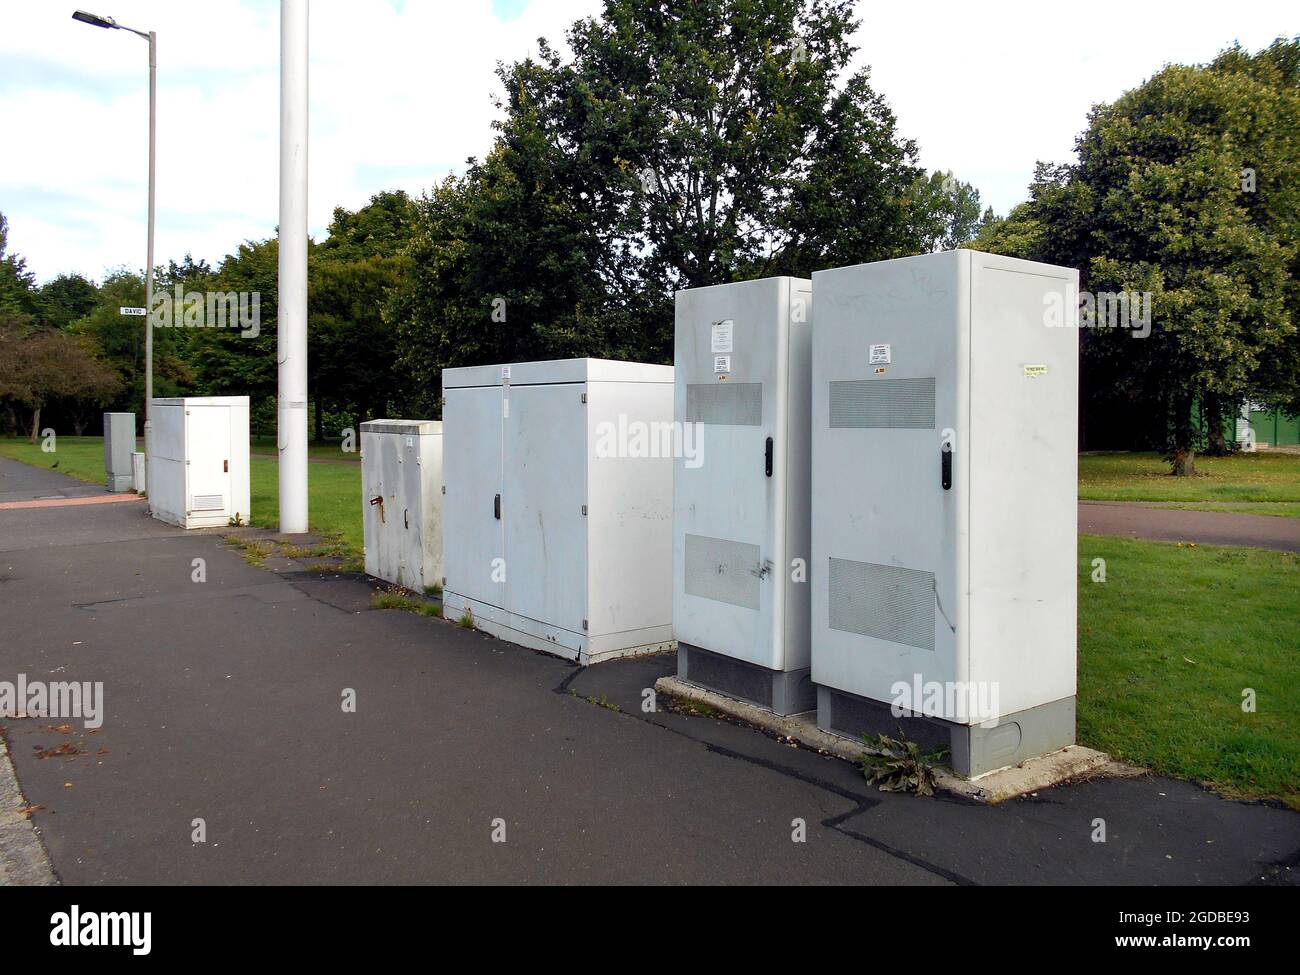 Huge electrical cabinets are sighted on the pavement next to a park in Glasgow. Aug 2021. ©ALAN WYLIE/ALAMY Stock Photo